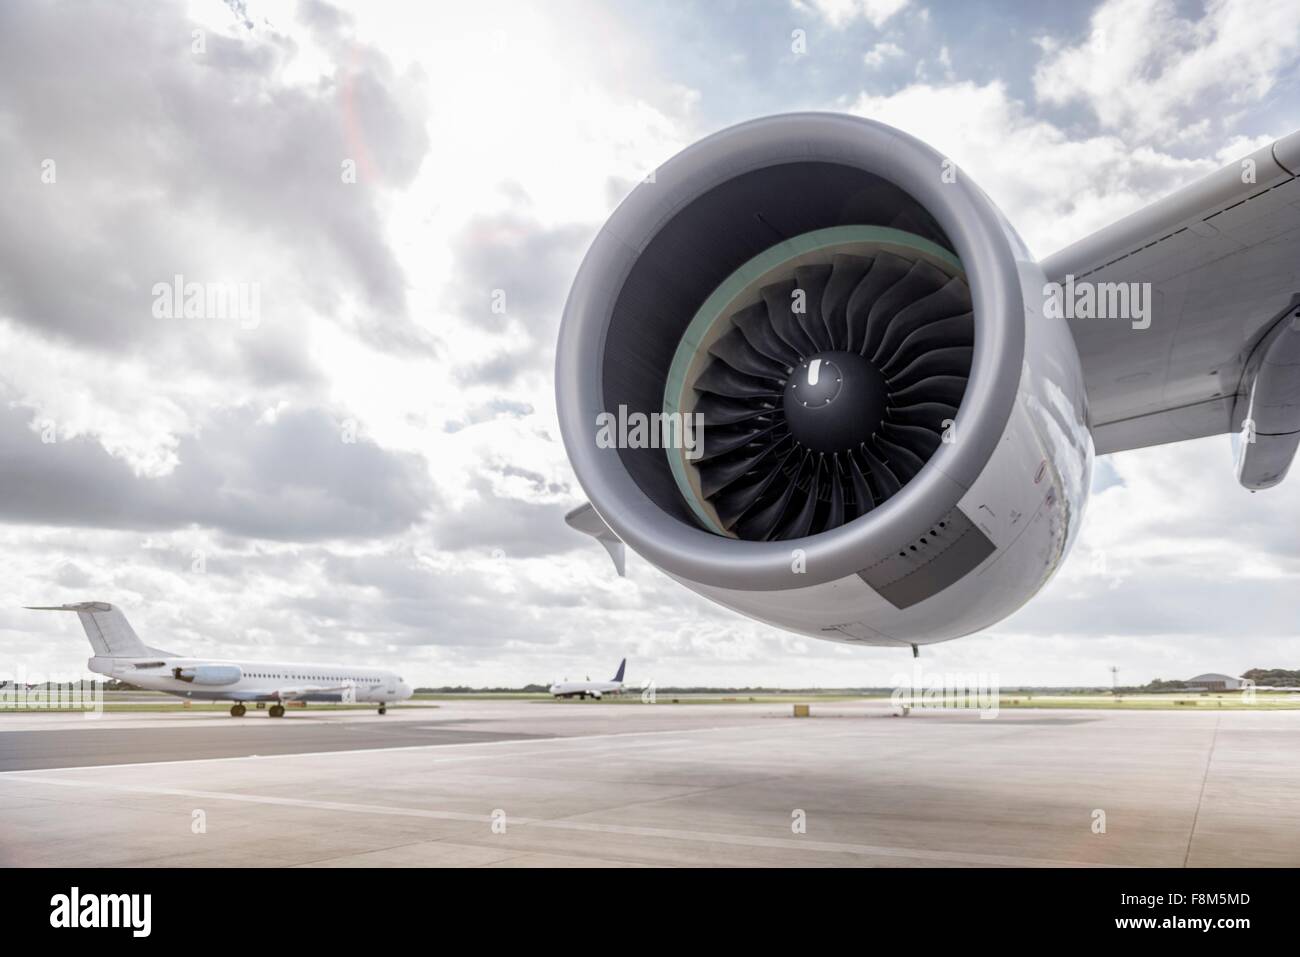 View of A380 aircraft jet engine and planes on runway Stock Photo